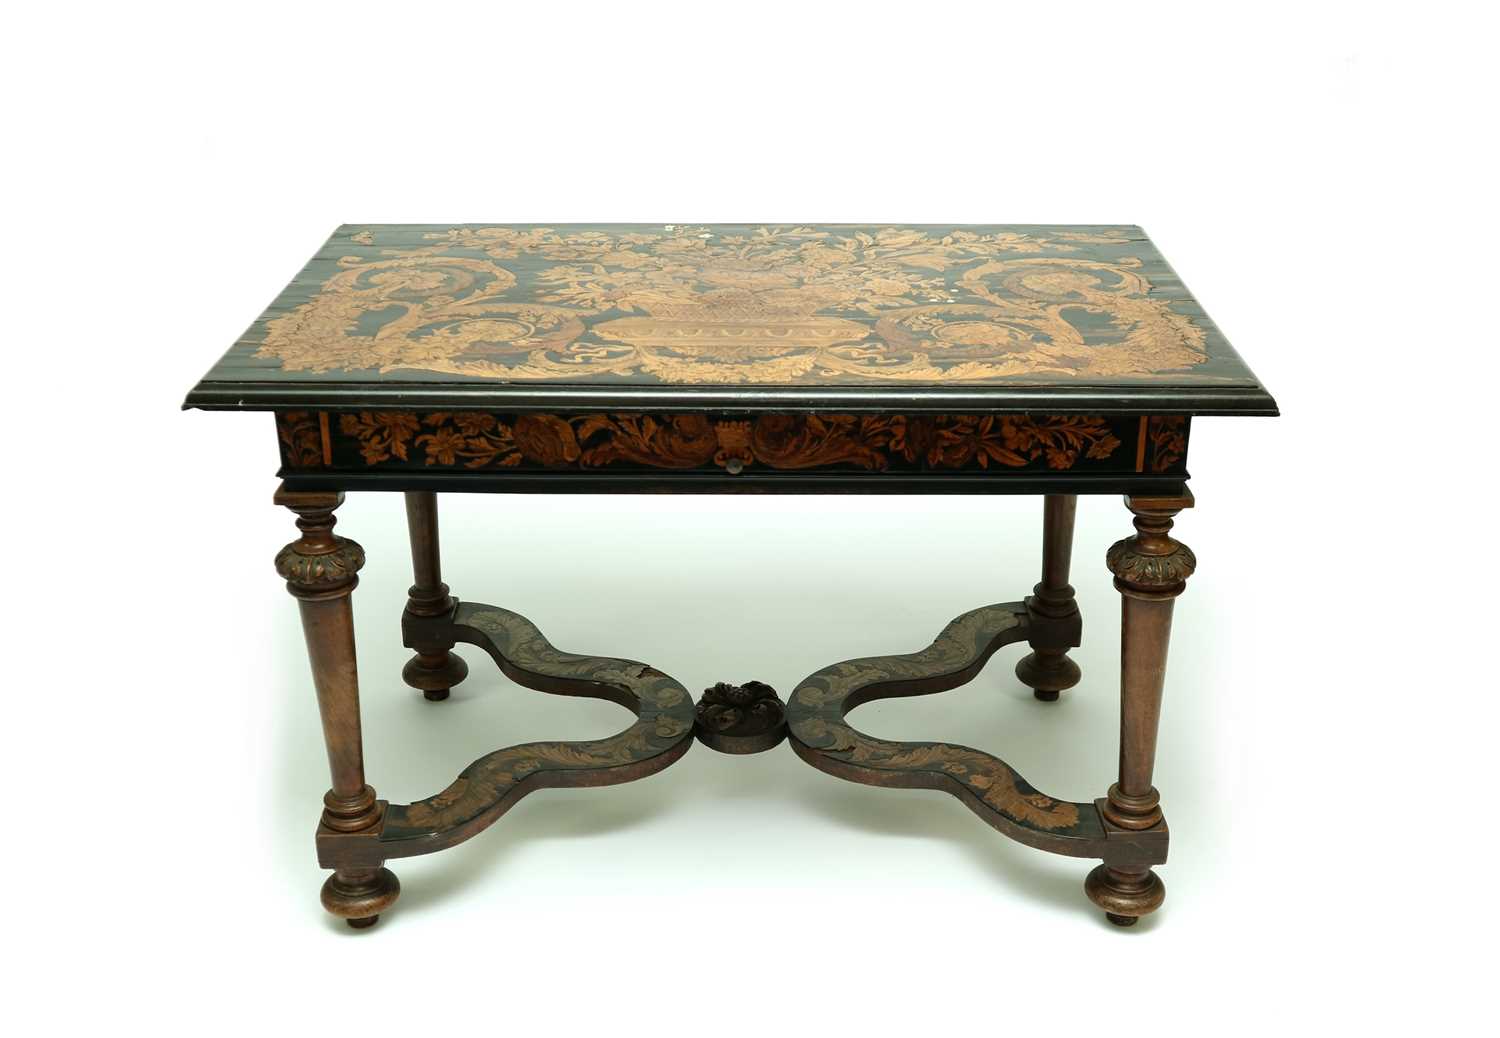 455 - A late 17th century style Dutch walnut and ebonised marquetry side table, 19th century